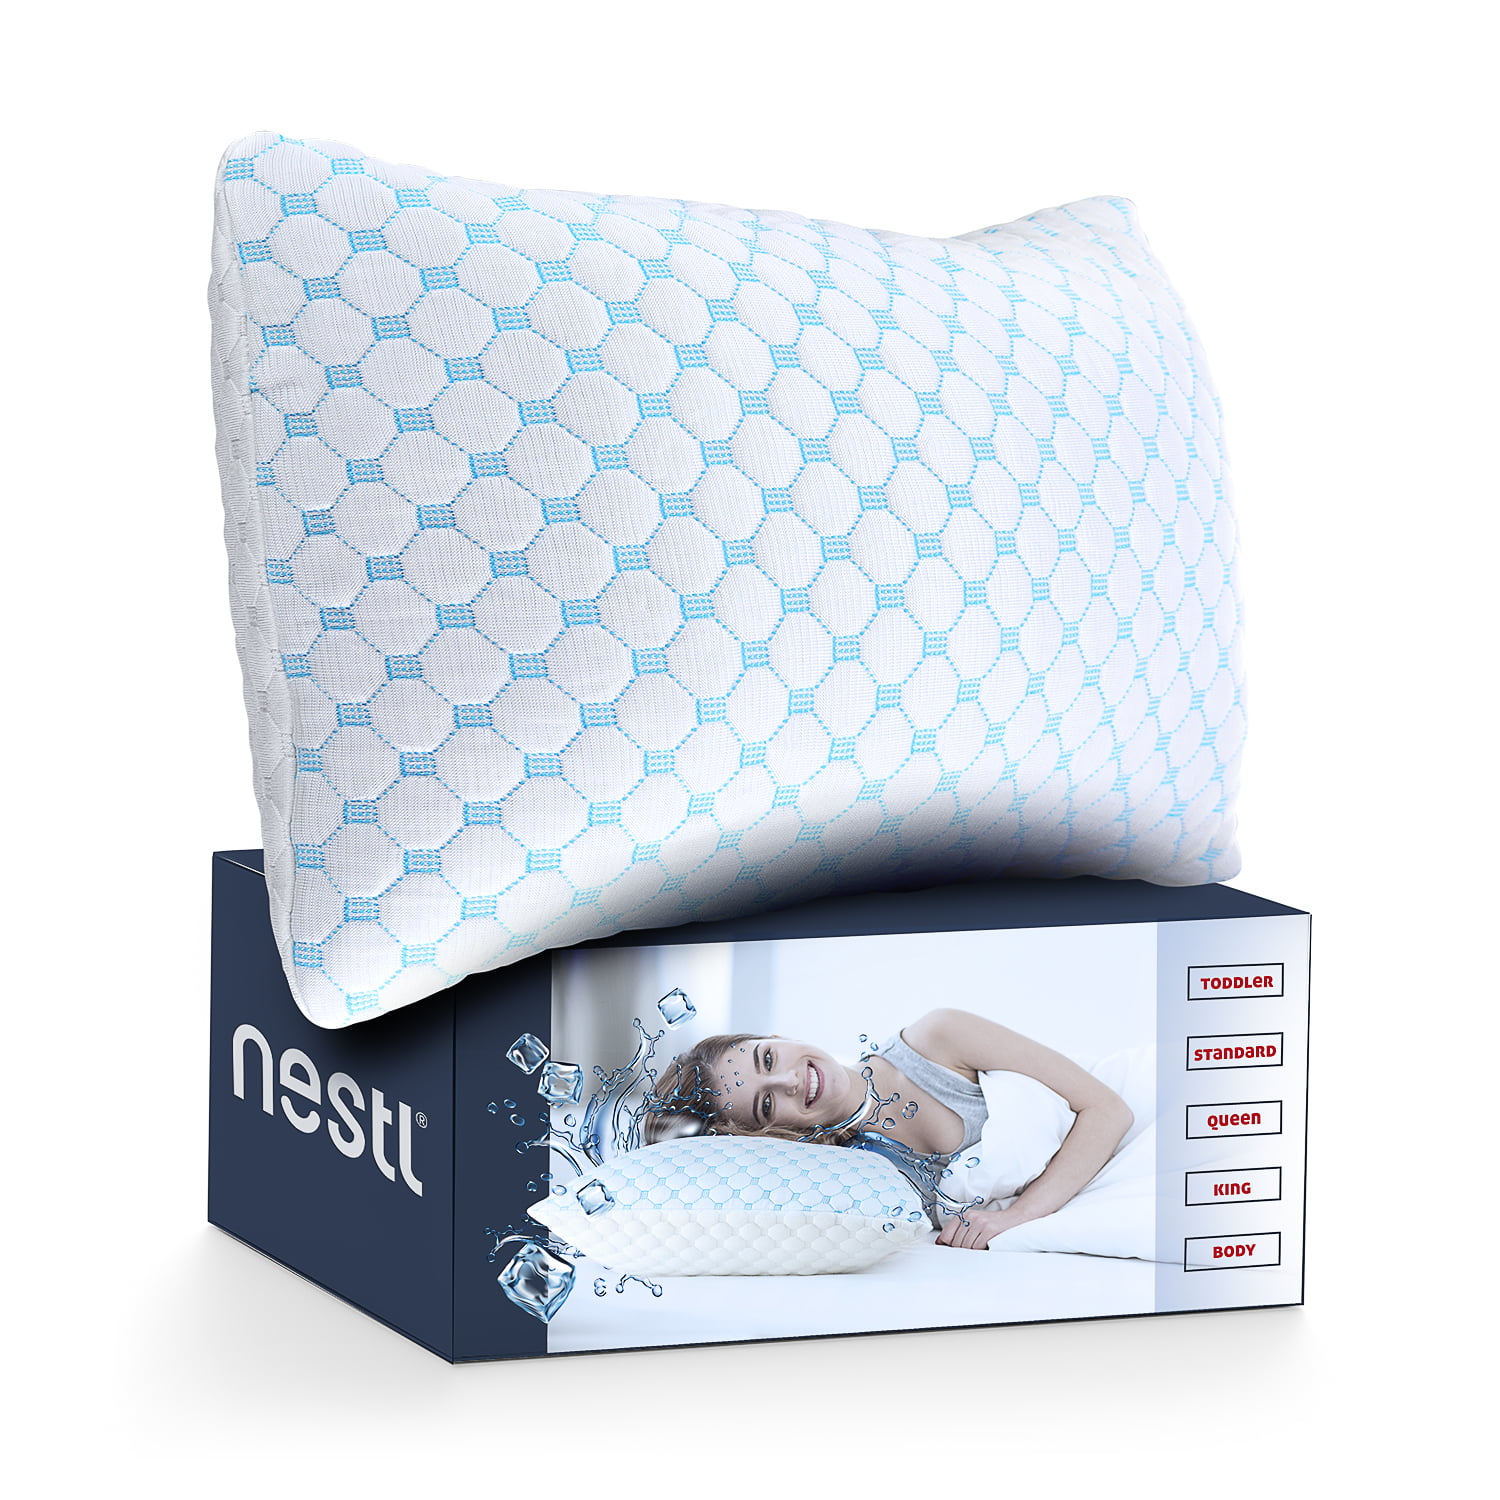 Free Shipping!!! Serta Cooling Gel Memory Foam Cluster Pillows 2-pack 